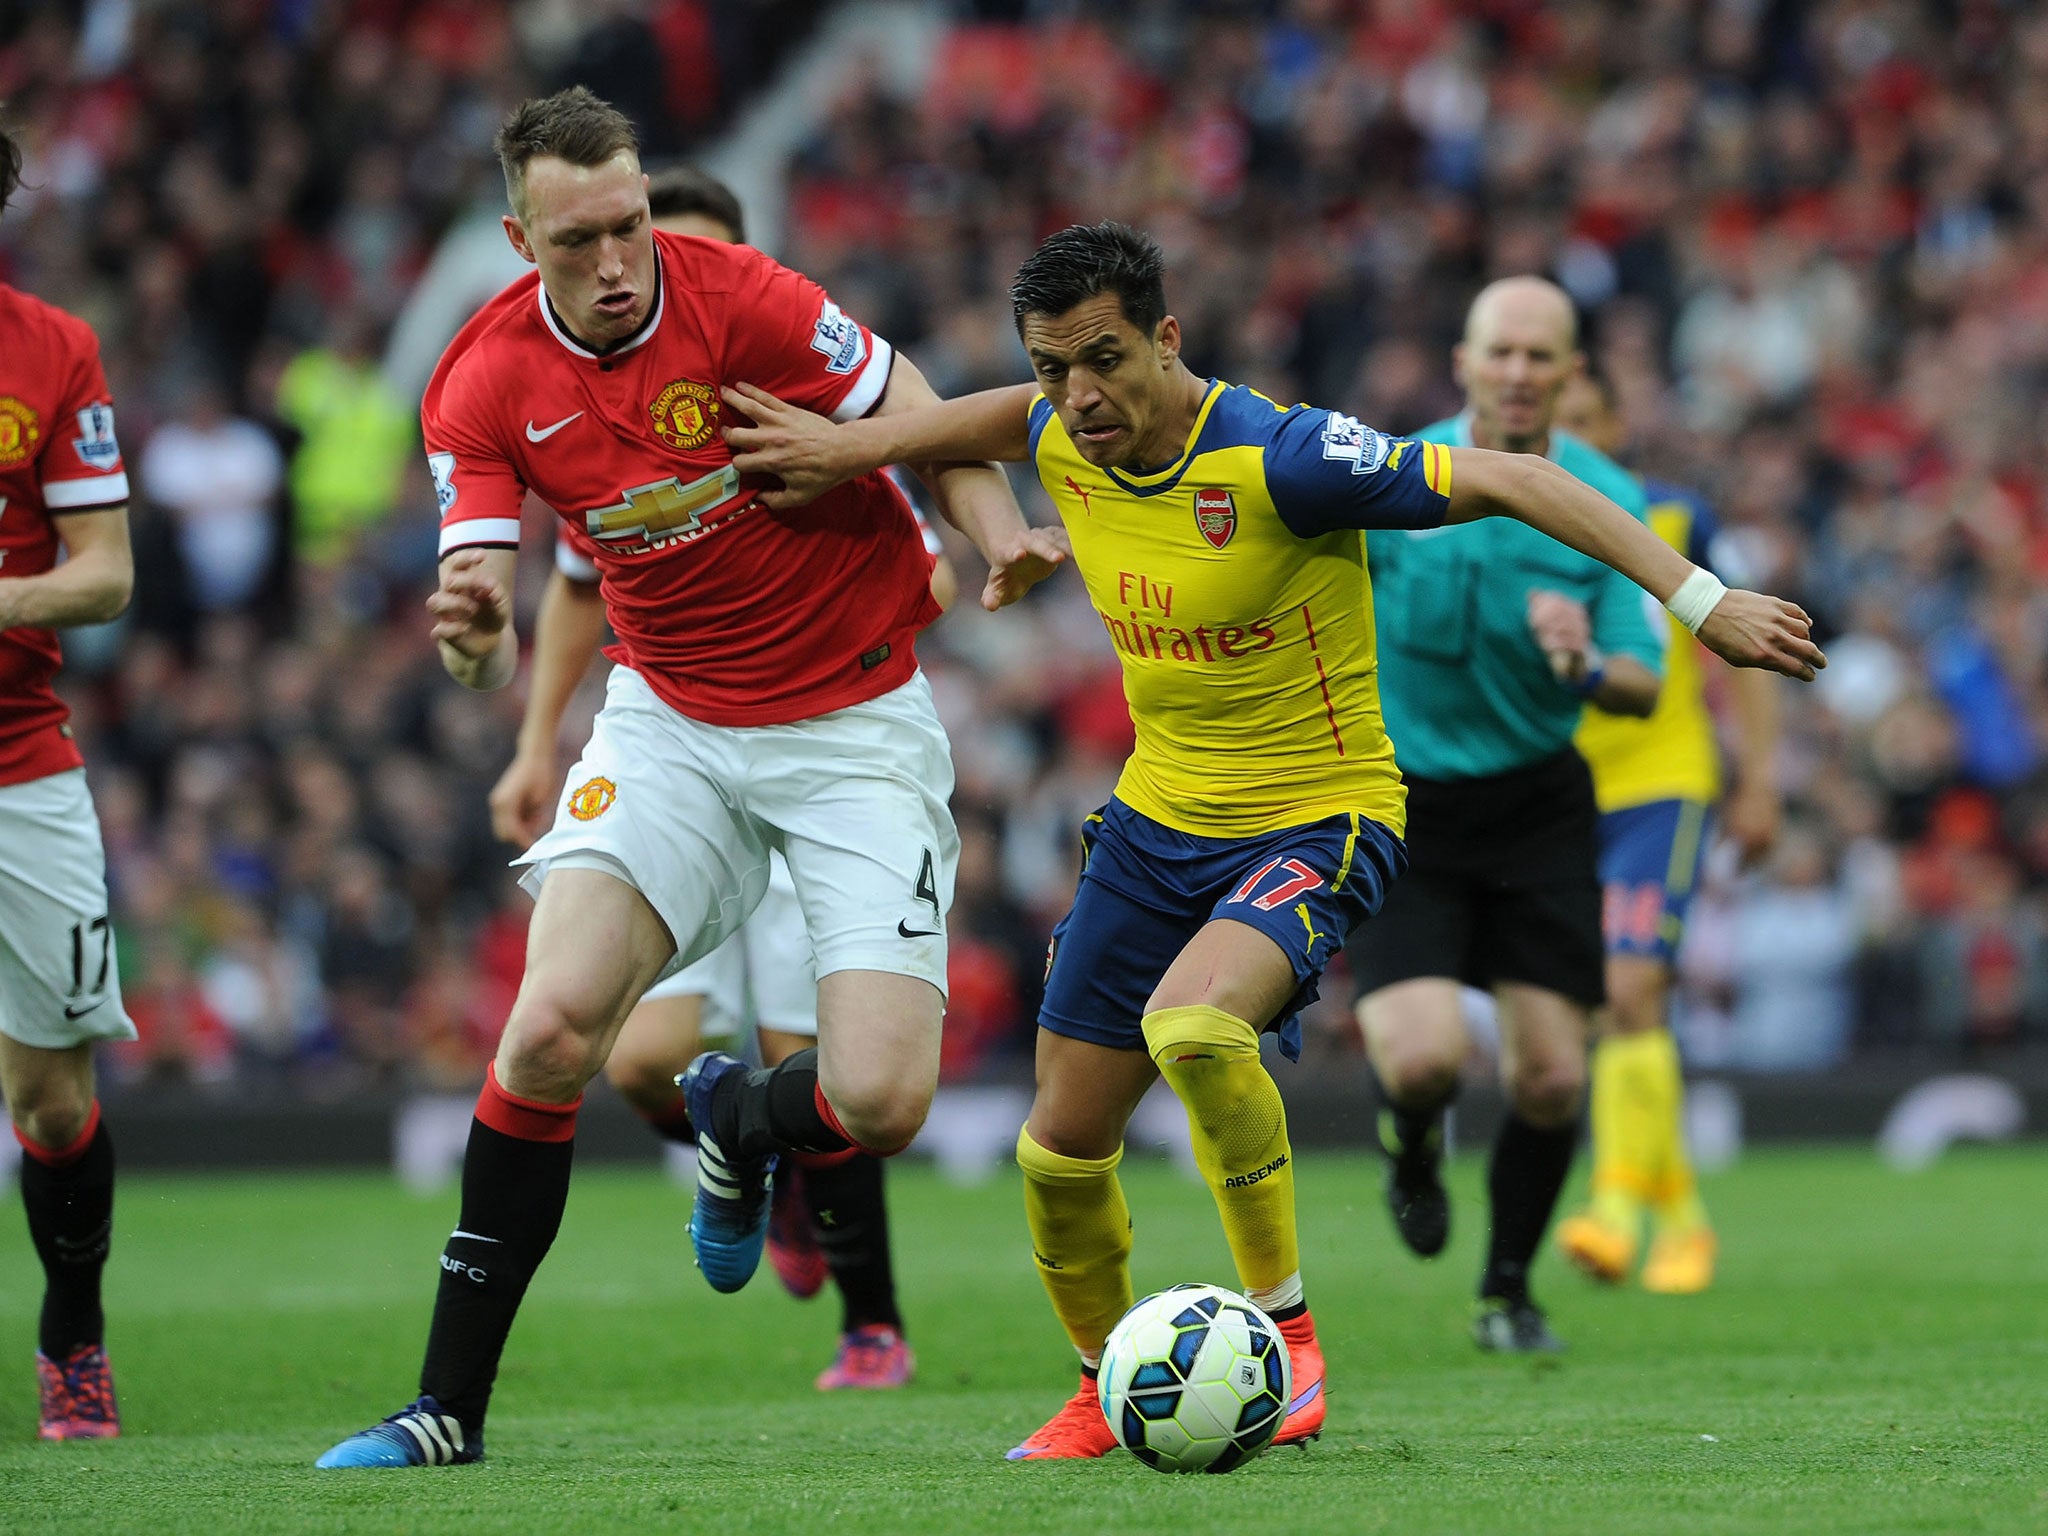 Phil Jones and Alexis Sanchez compete for the ball during Manchester United vs Arsenal